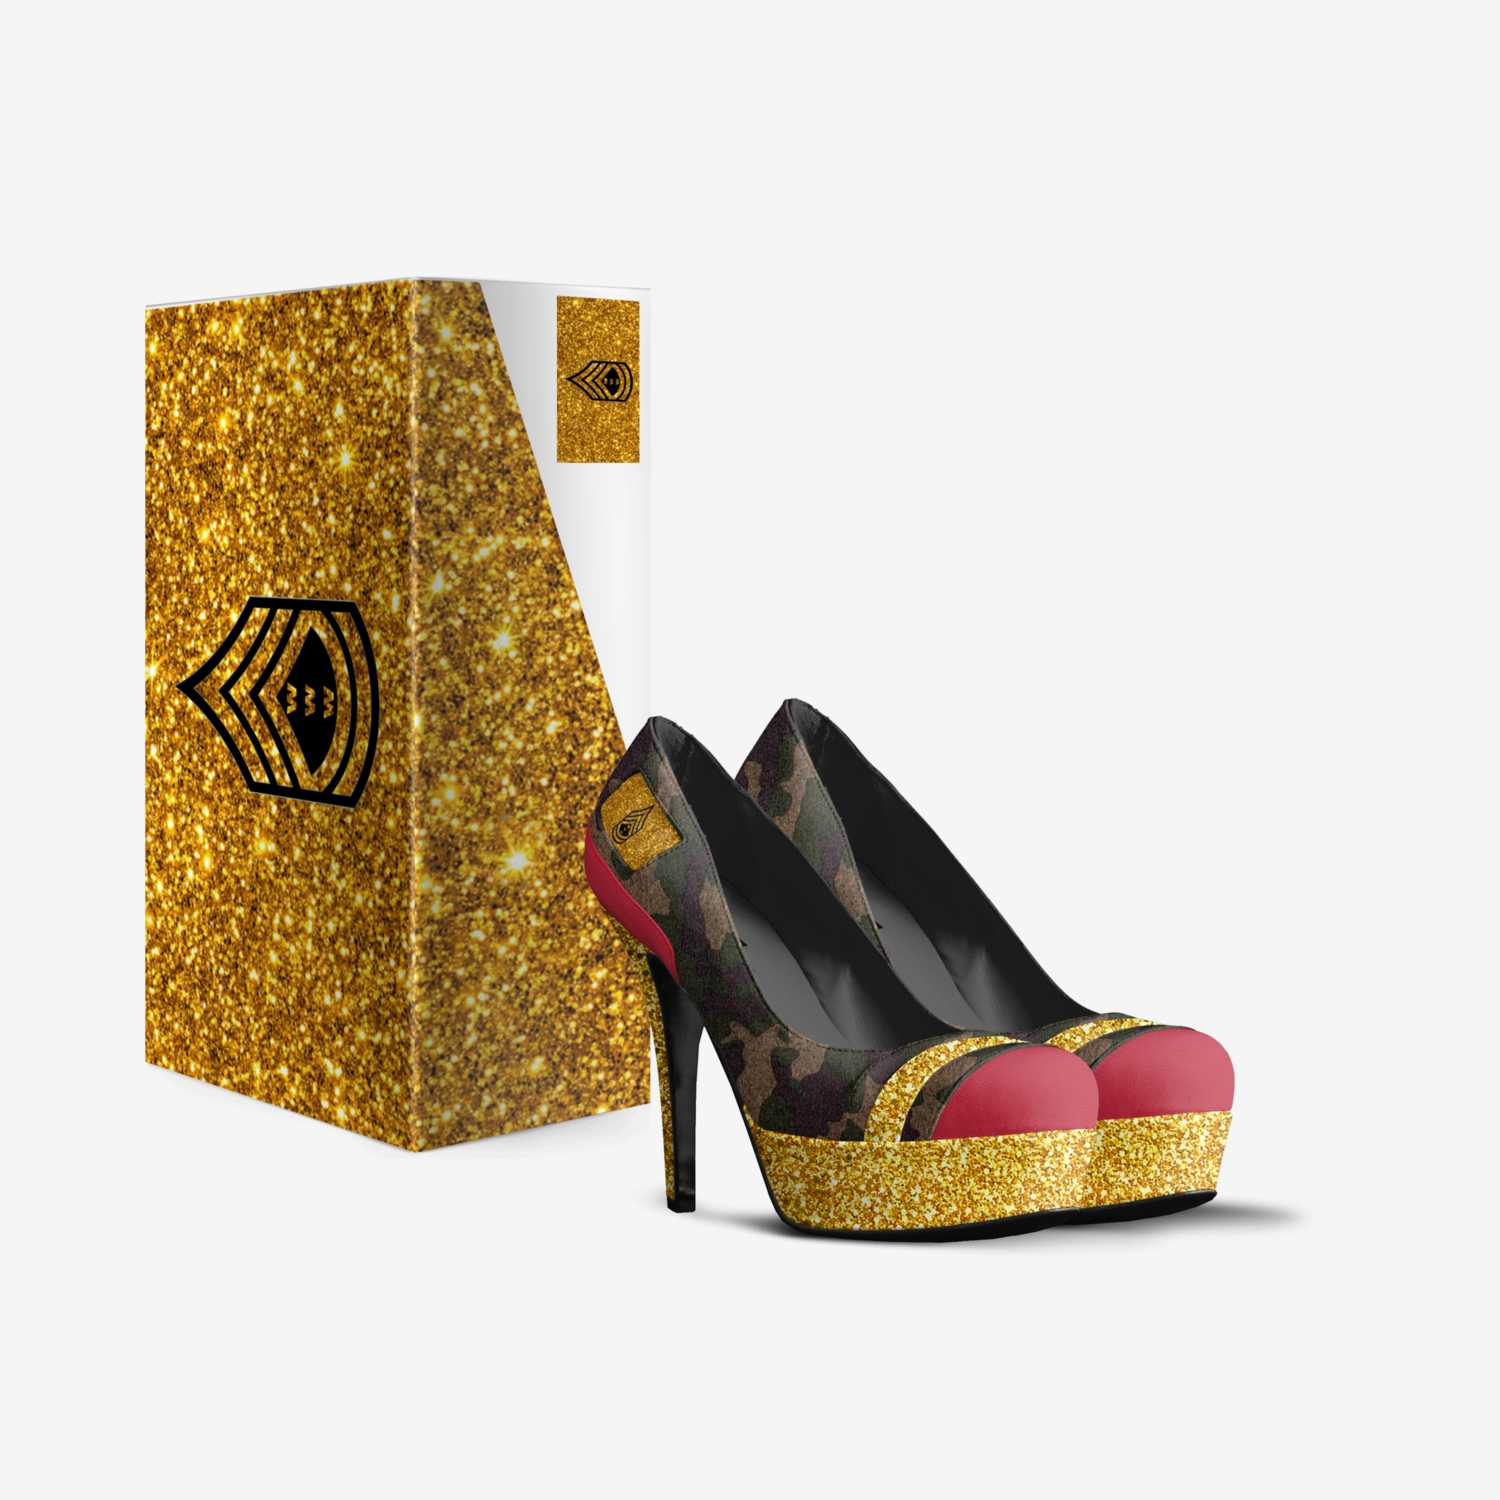 Queen Alicia custom made in Italy shoes by John H. Harris, Jr. | Box view